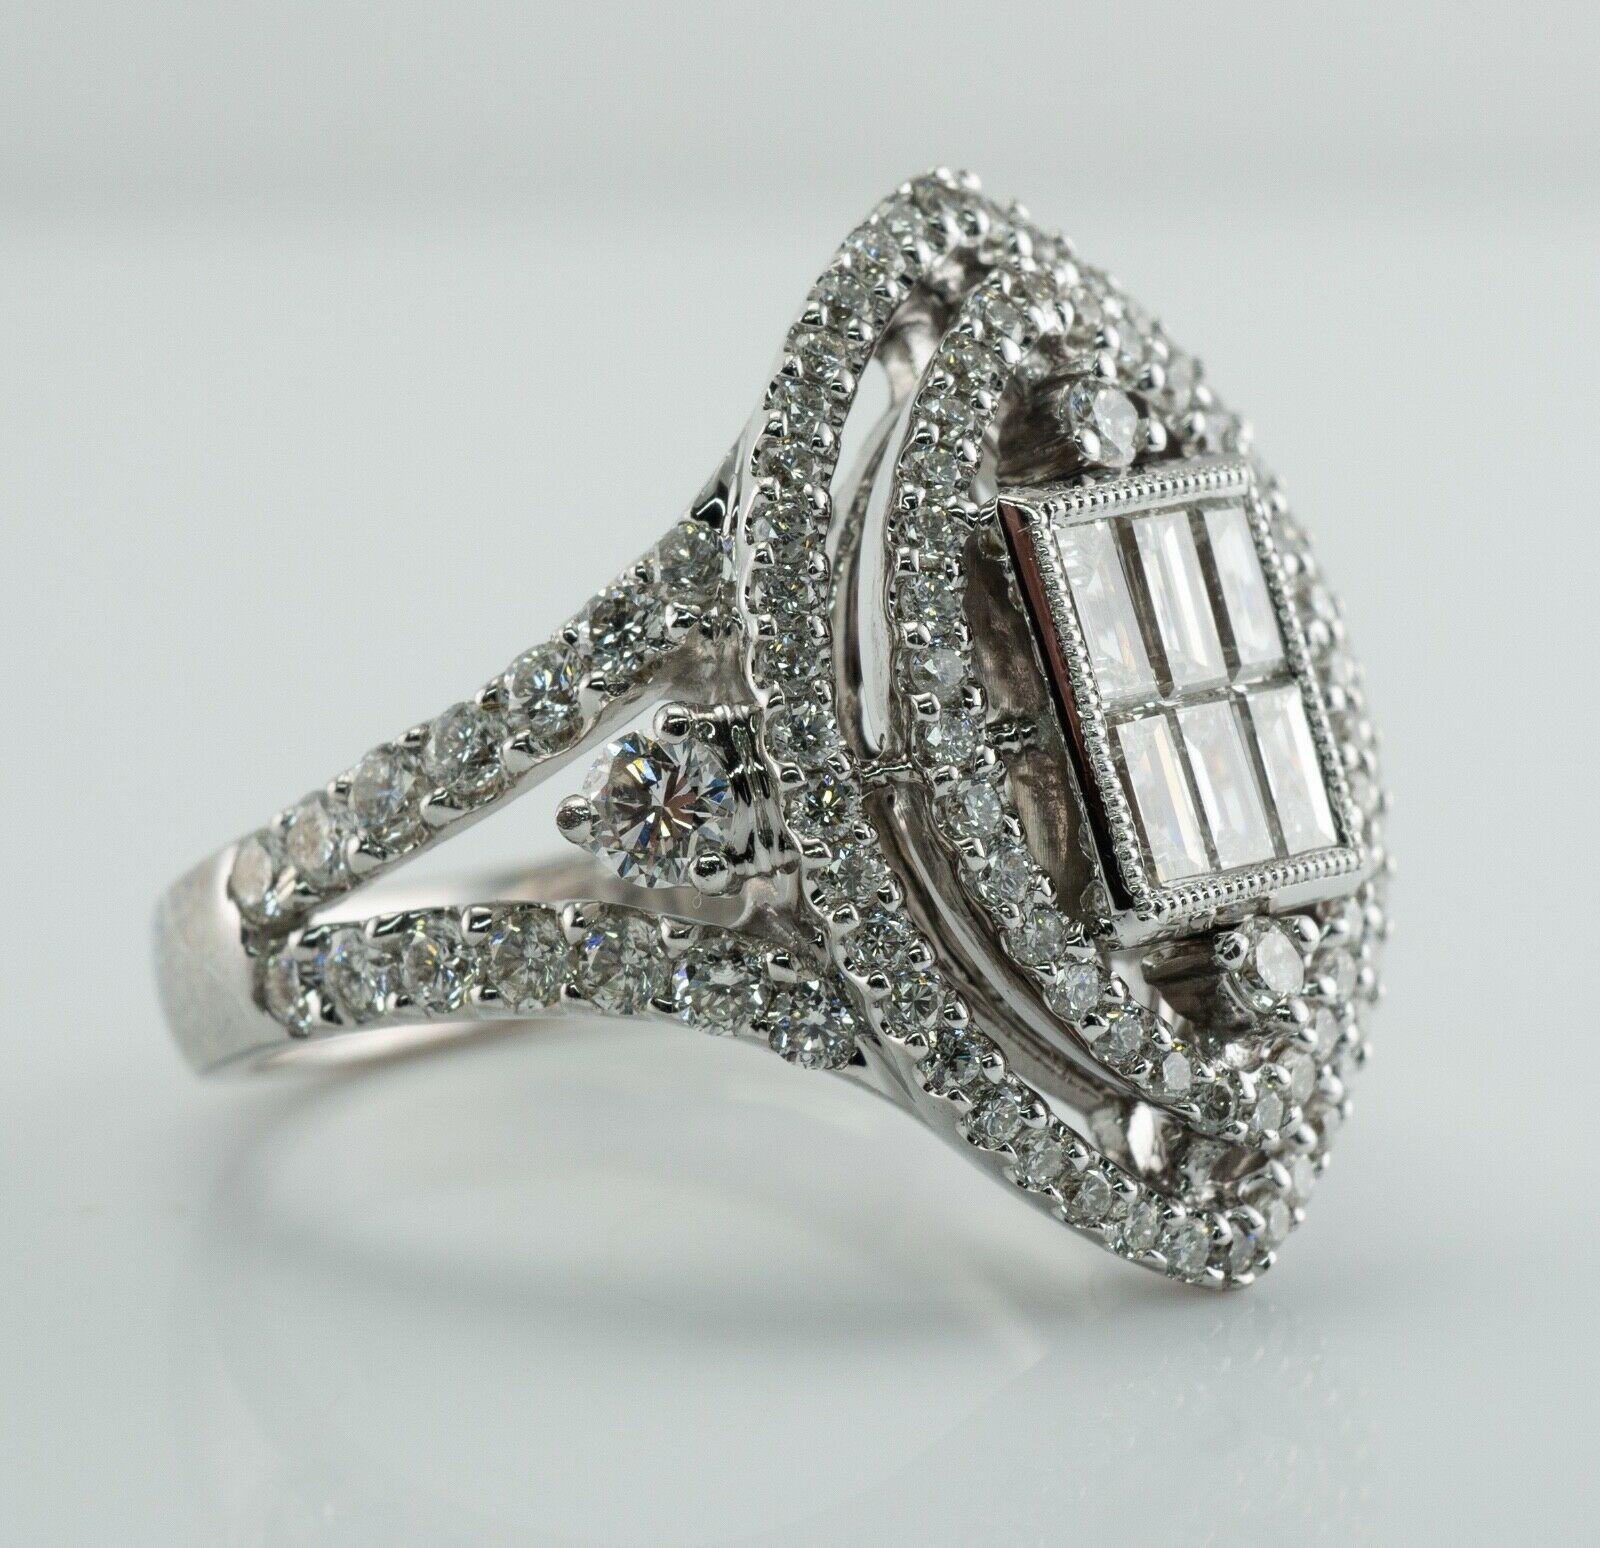 This beautiful estate ring is crafted in solid 14K White Gold. 
Six rectangular cut diamonds total .60 carat of VS2-SI1 clarity and H color.
There are 98 round cut diamonds from .01 carat to .07 carat totaling 1.27 carats of SI1 clarity and H